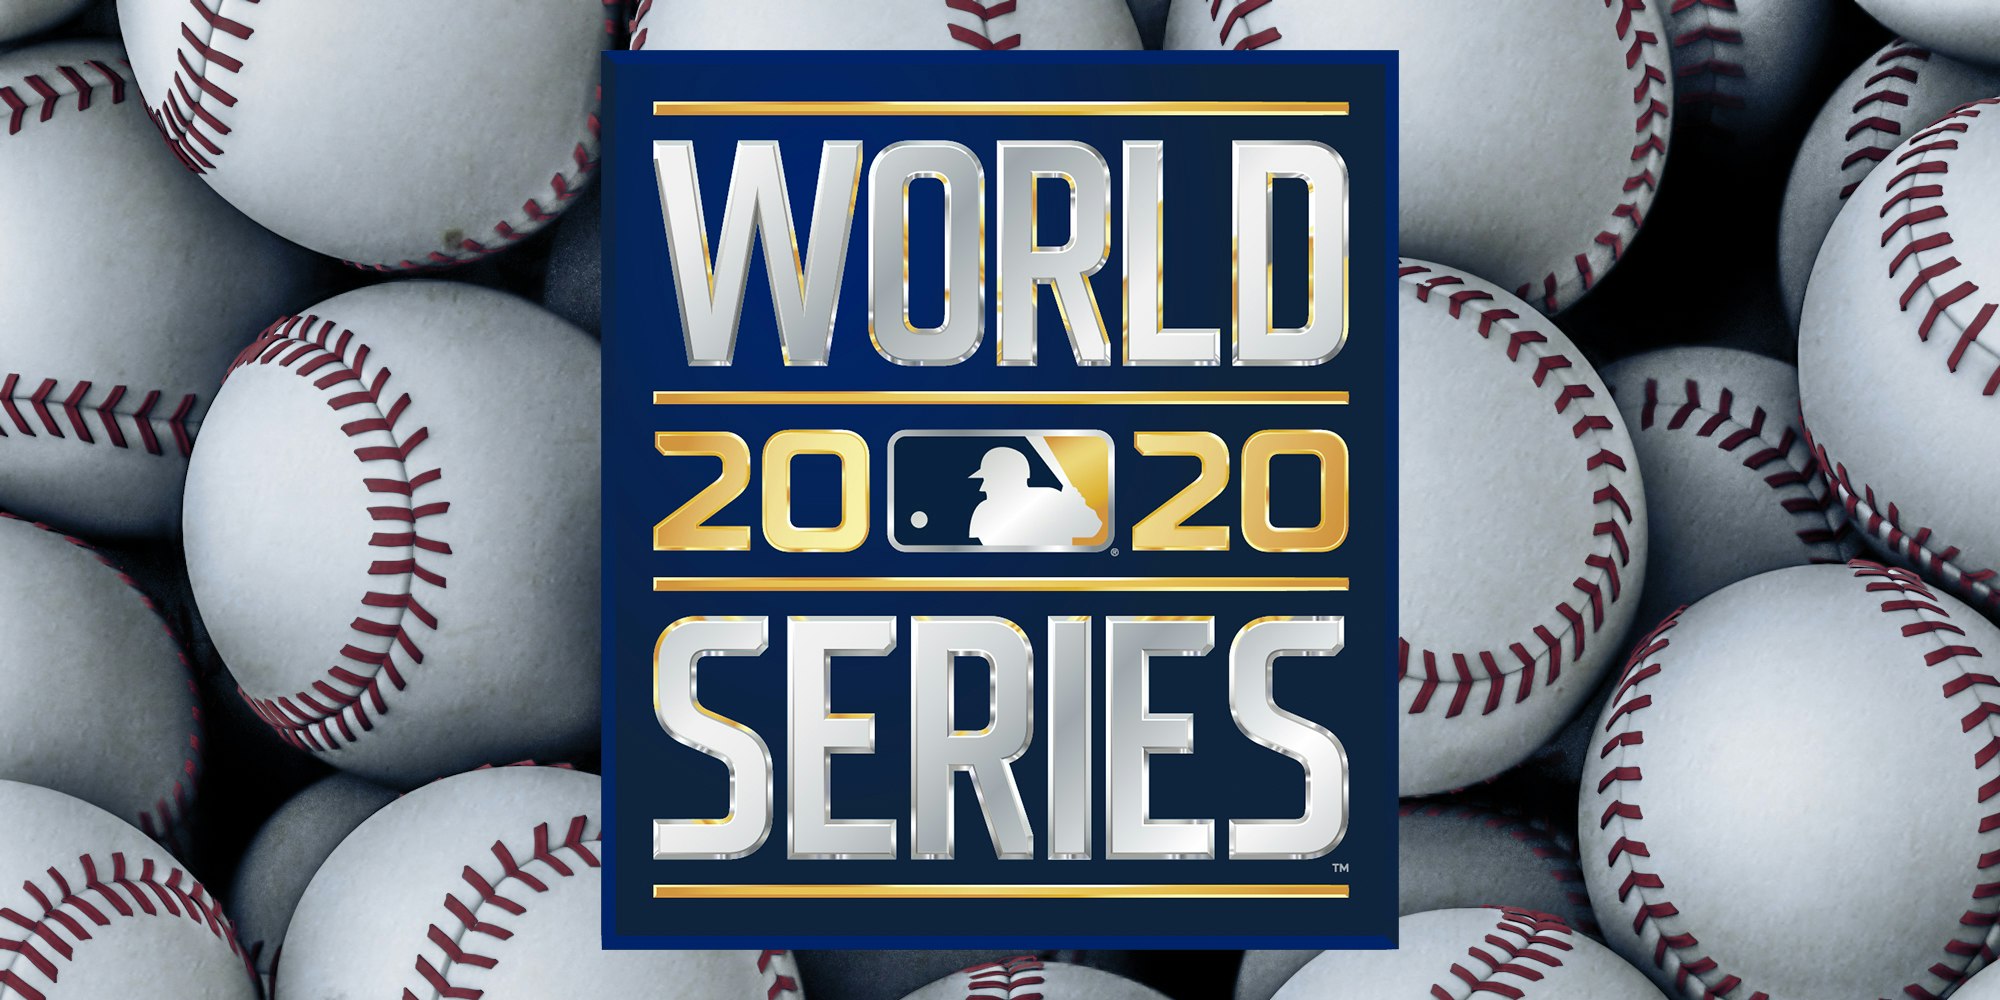 Stream the World Series How to Watch the 2020 World Series Live